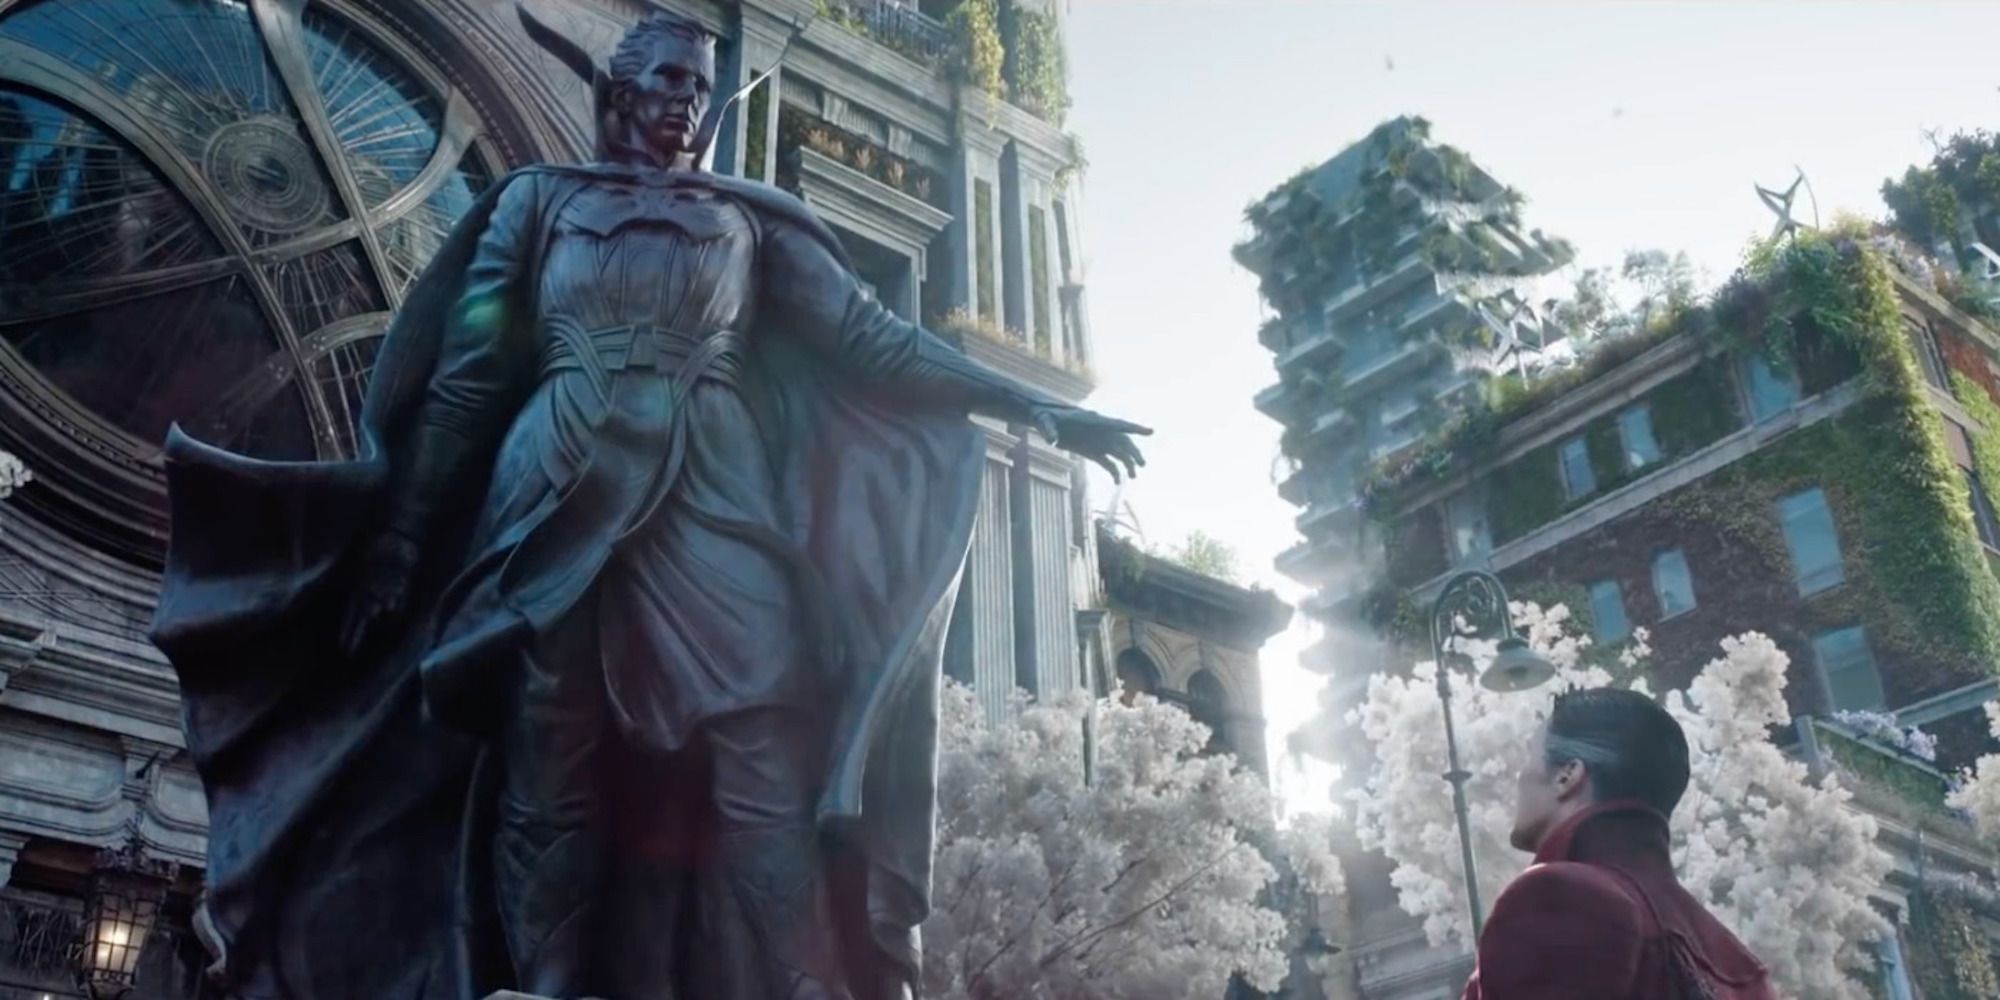 Doctor Strange looks at his statue in Doctor Strange in the Multiverse of Madness